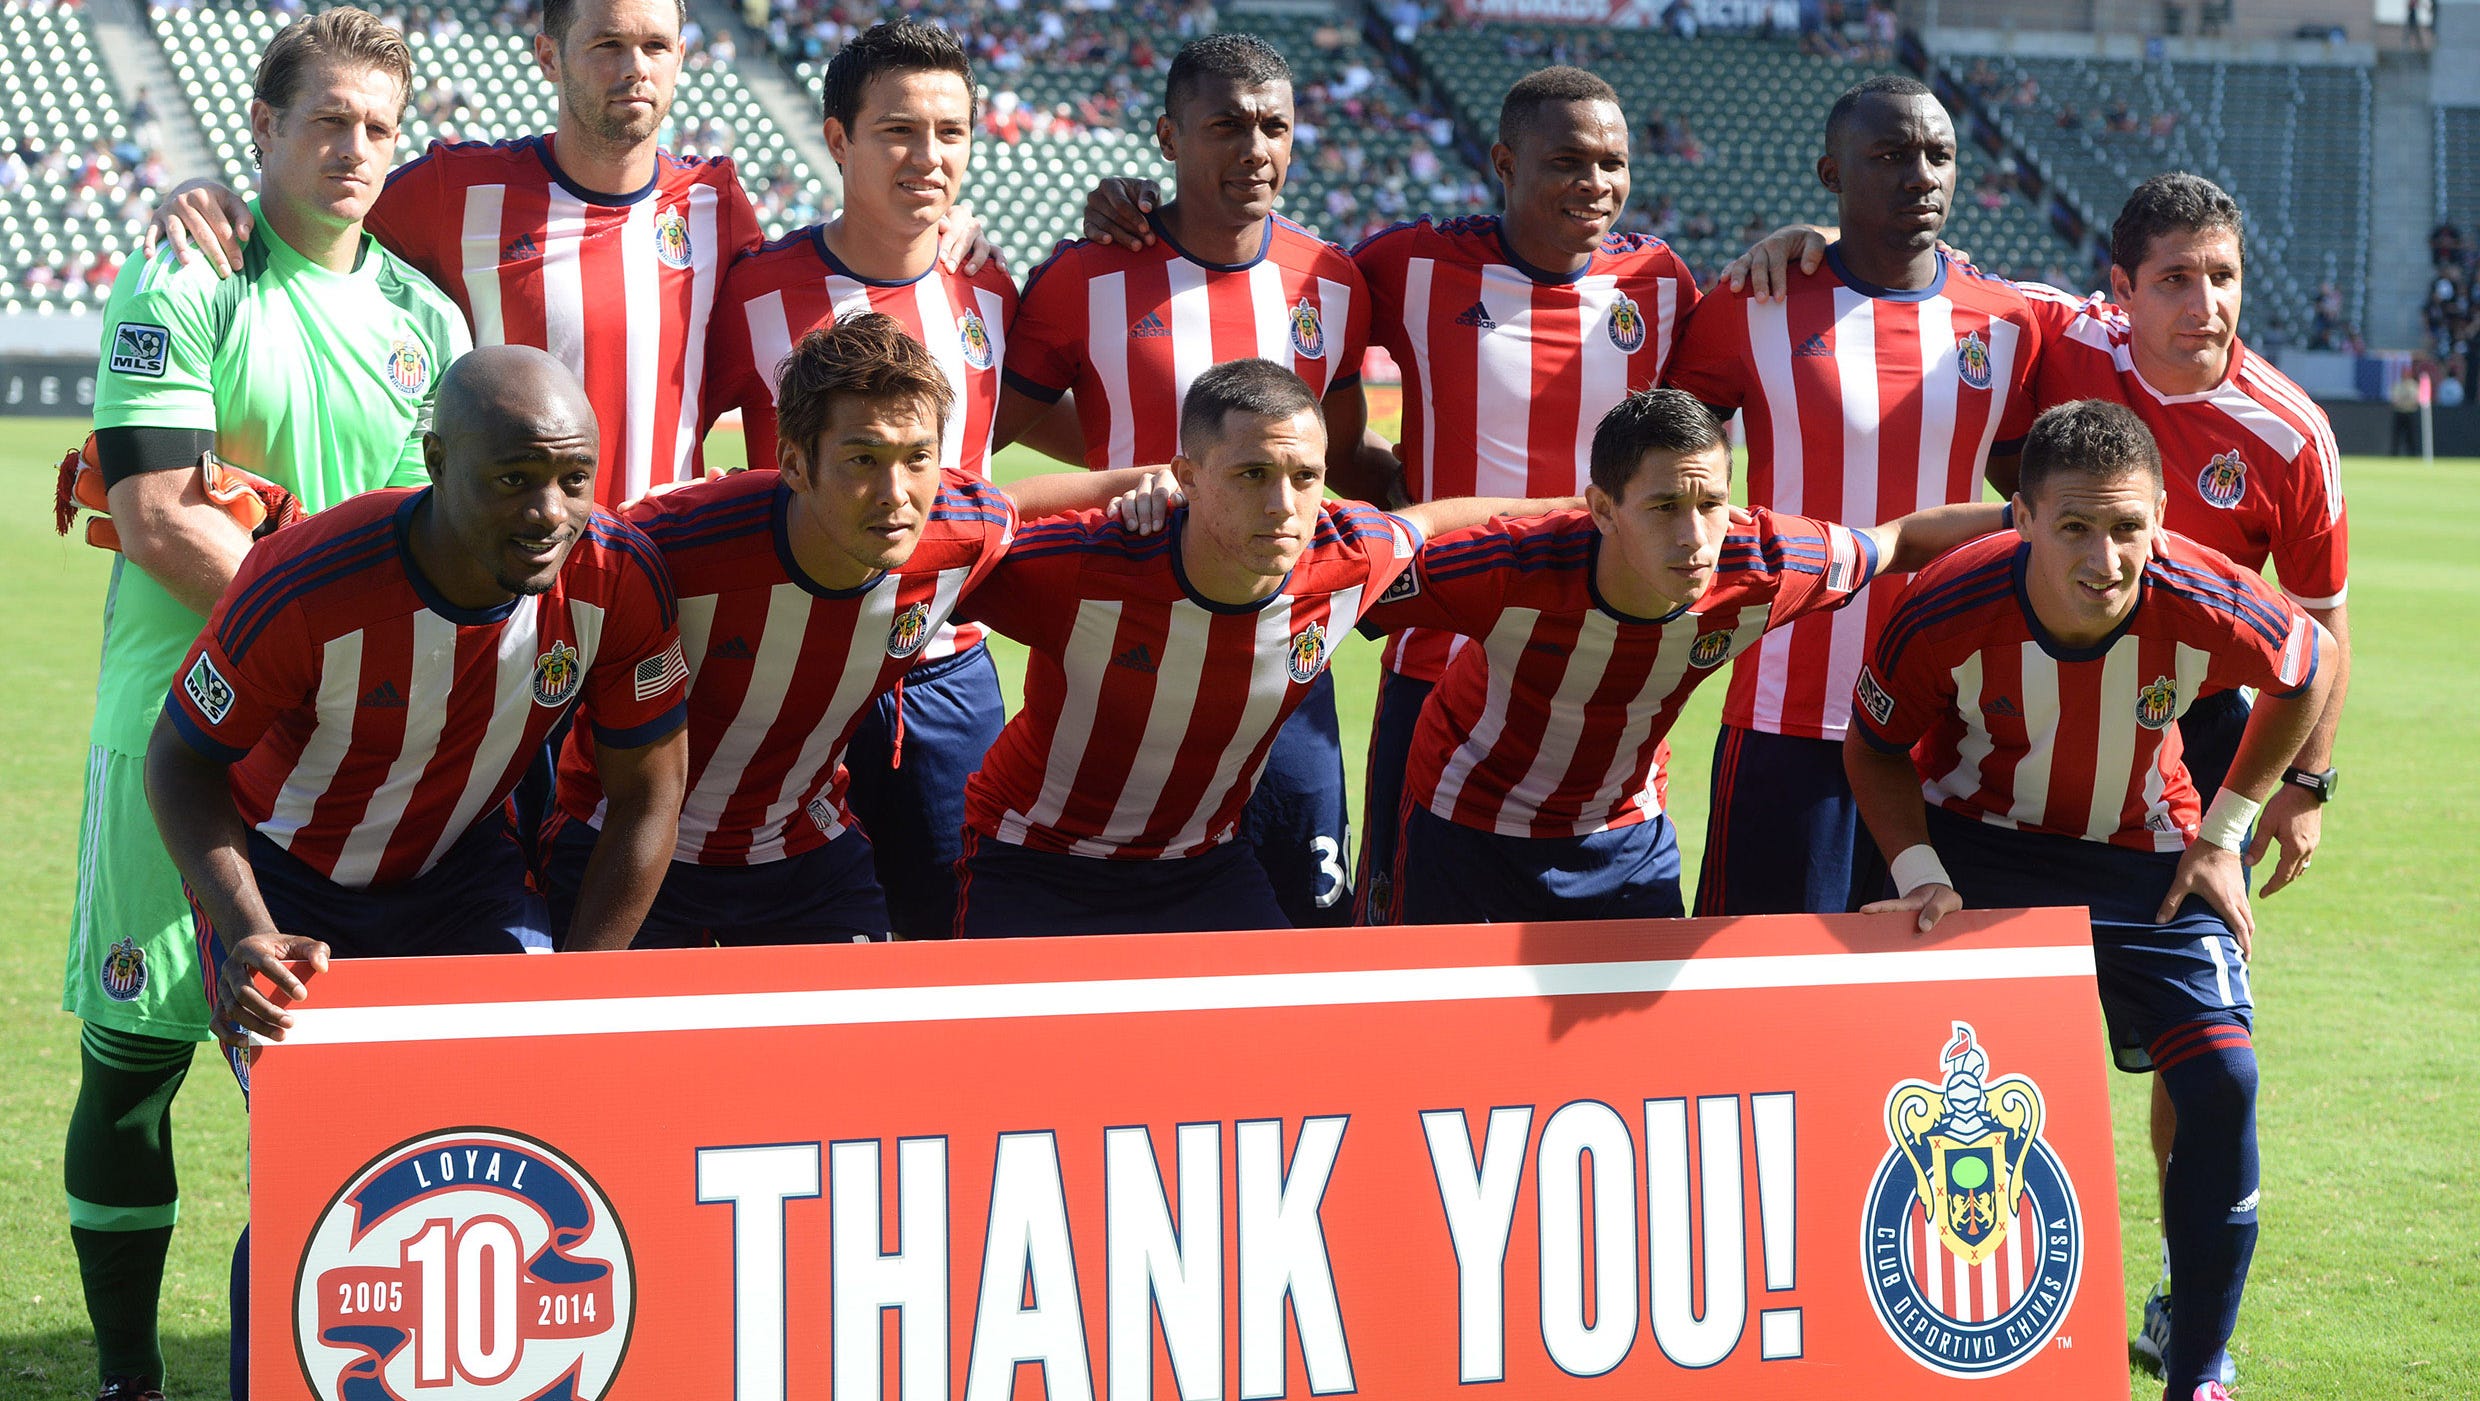 Chivas USA disbands after 10 troubled years